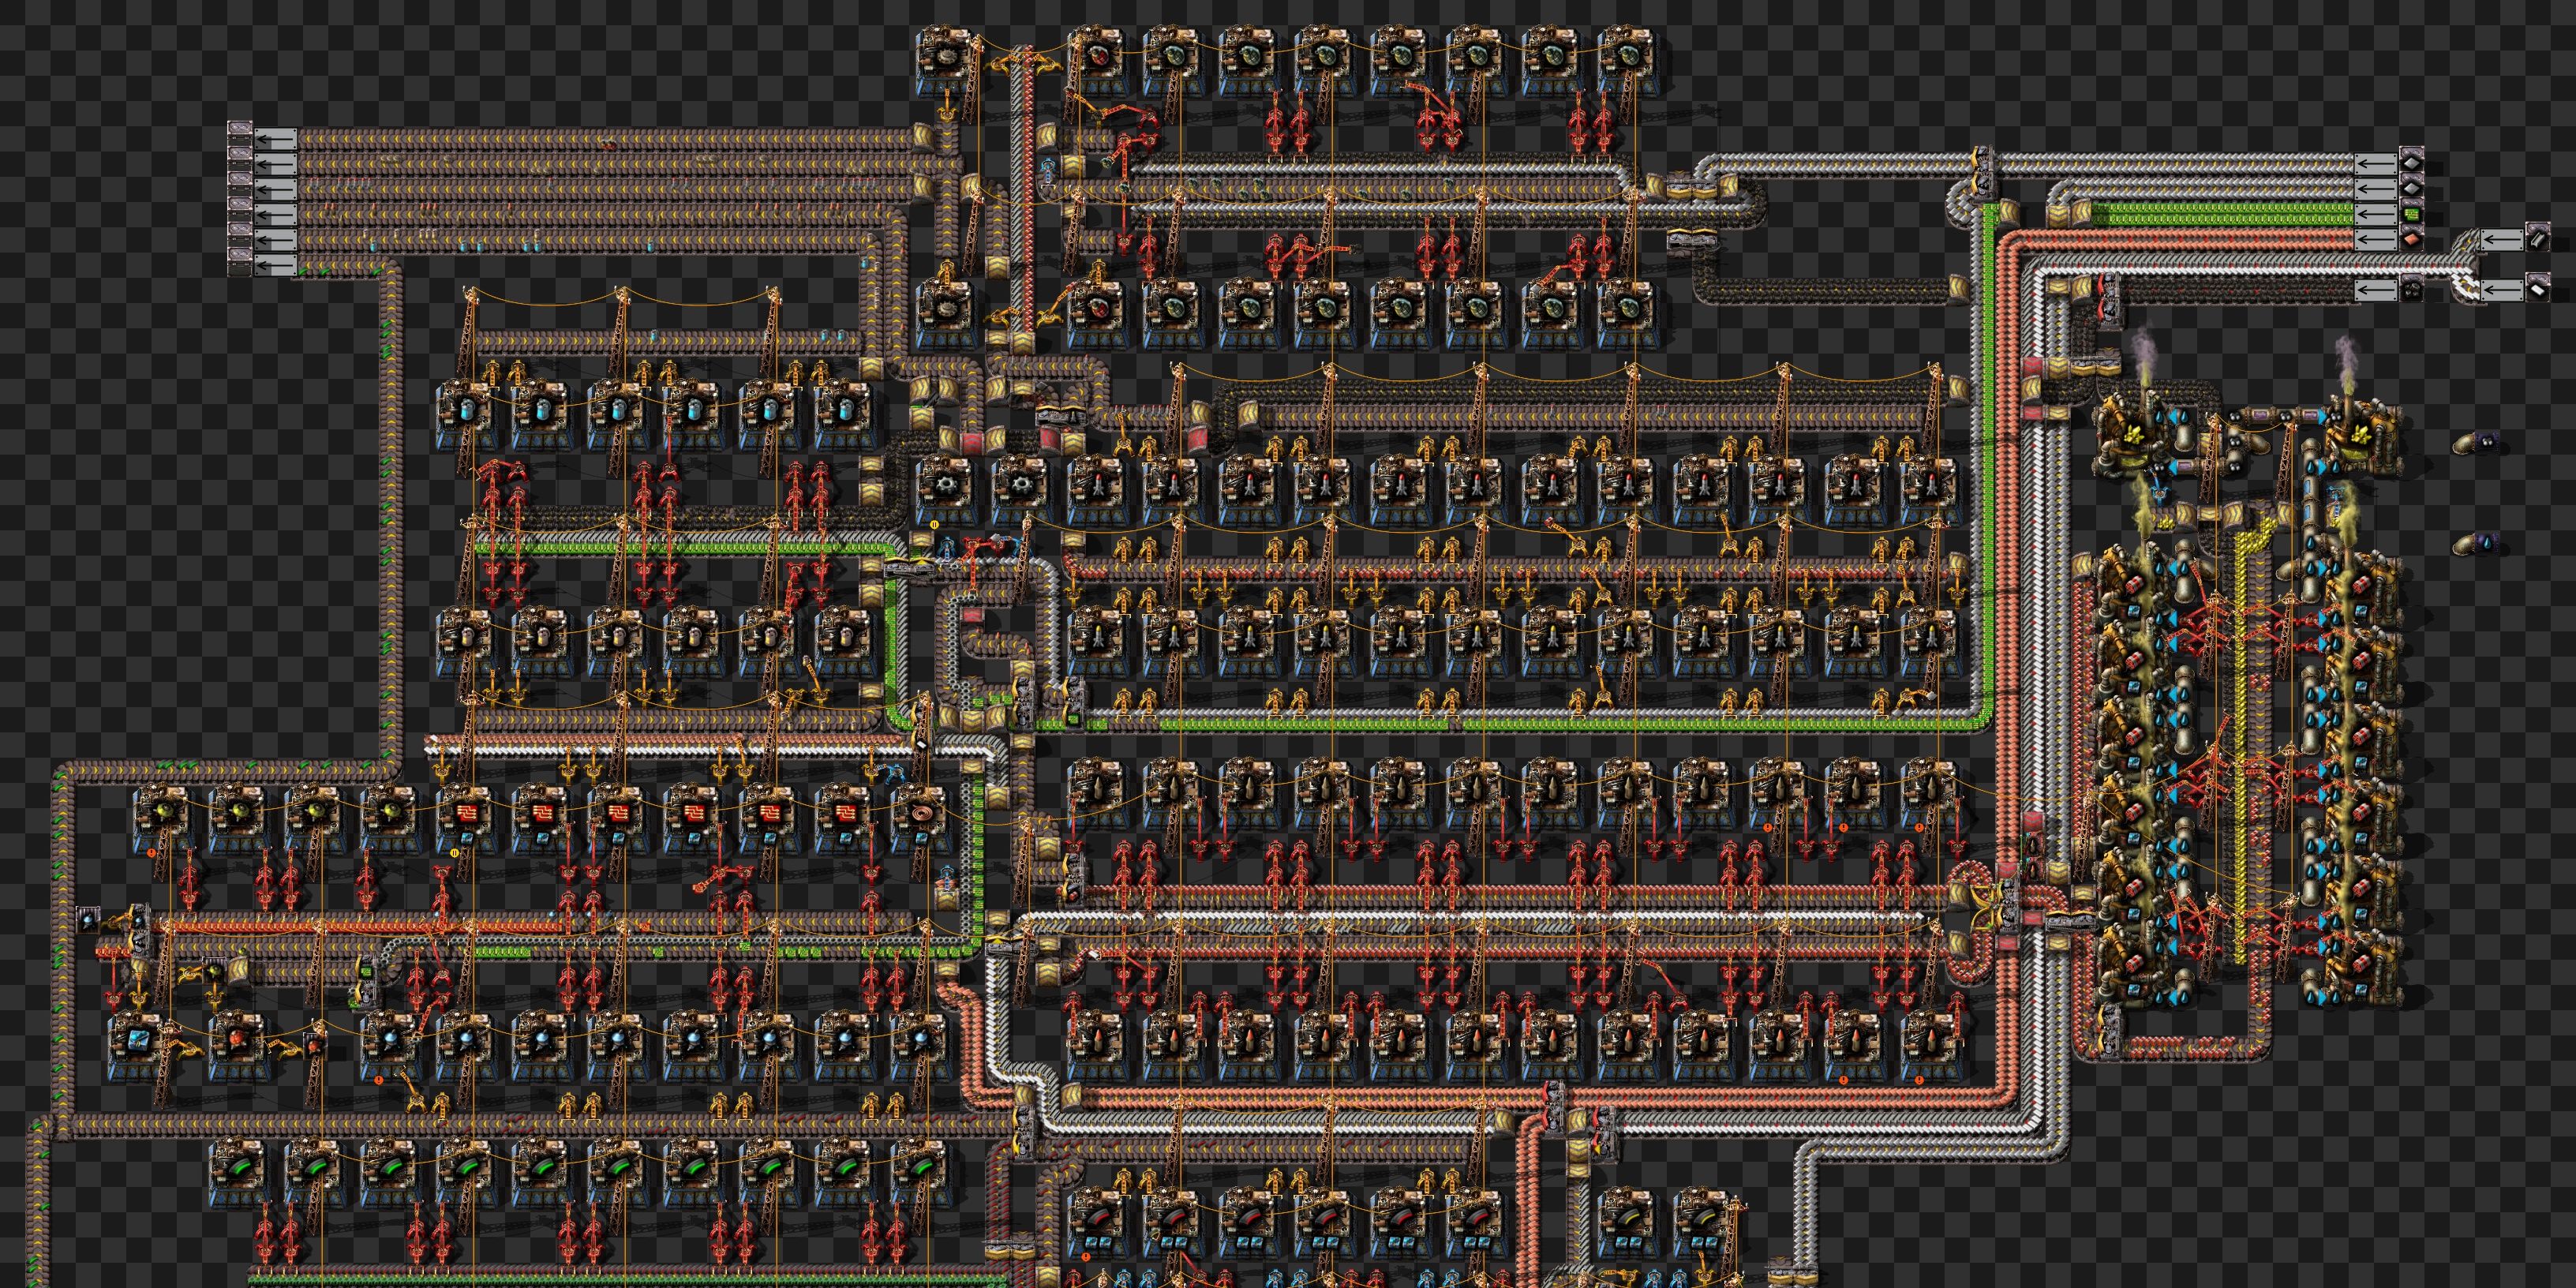 A weapons factory in Factorio